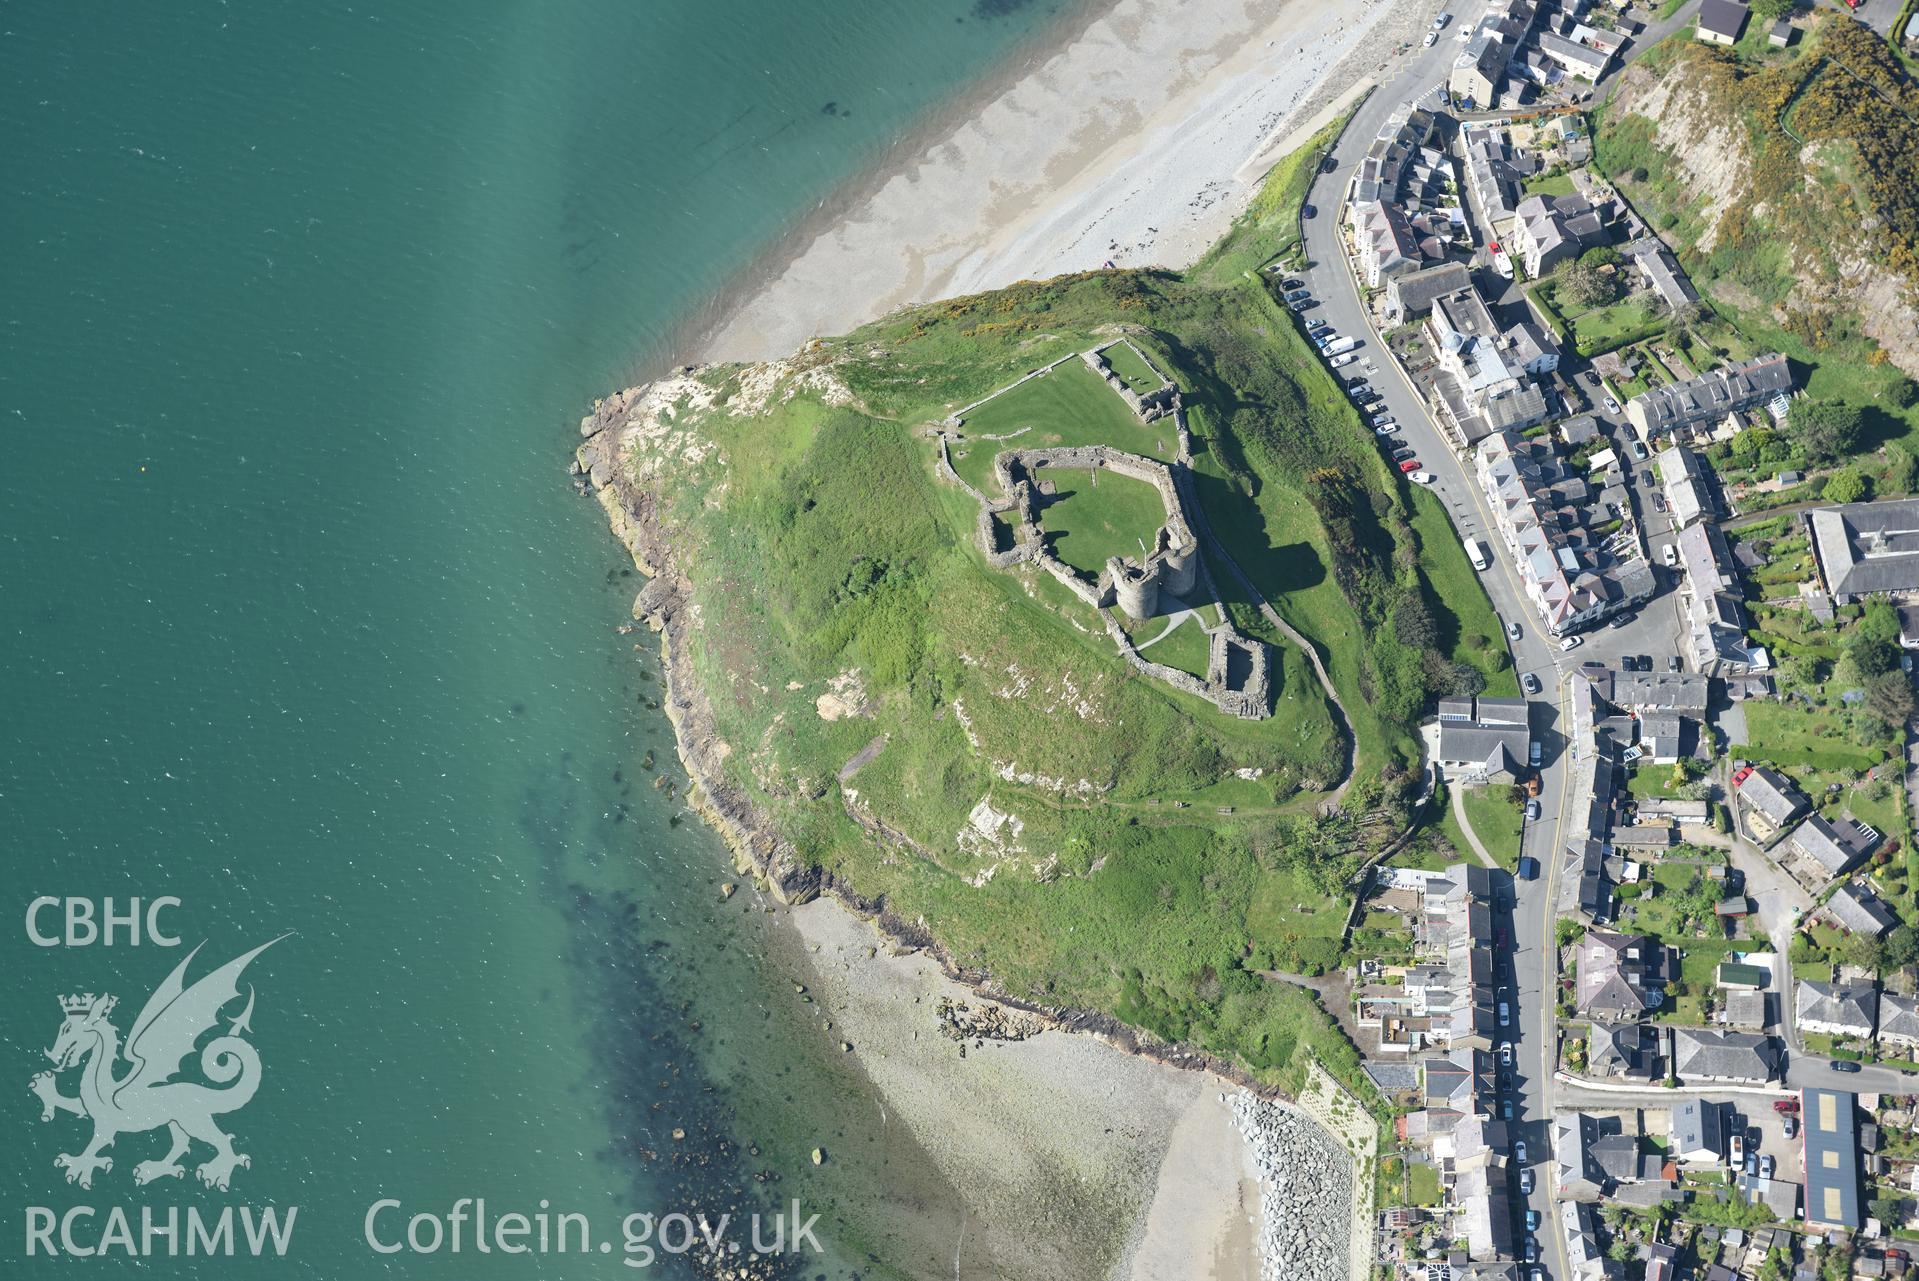 Aerial photography of Criccieth and its castle taken on 3rd May 2017.  Baseline aerial reconnaissance survey for the CHERISH Project. ? Crown: CHERISH PROJECT 2017. Produced with EU funds through the Ireland Wales Co-operation Programme 2014-2020. All ma